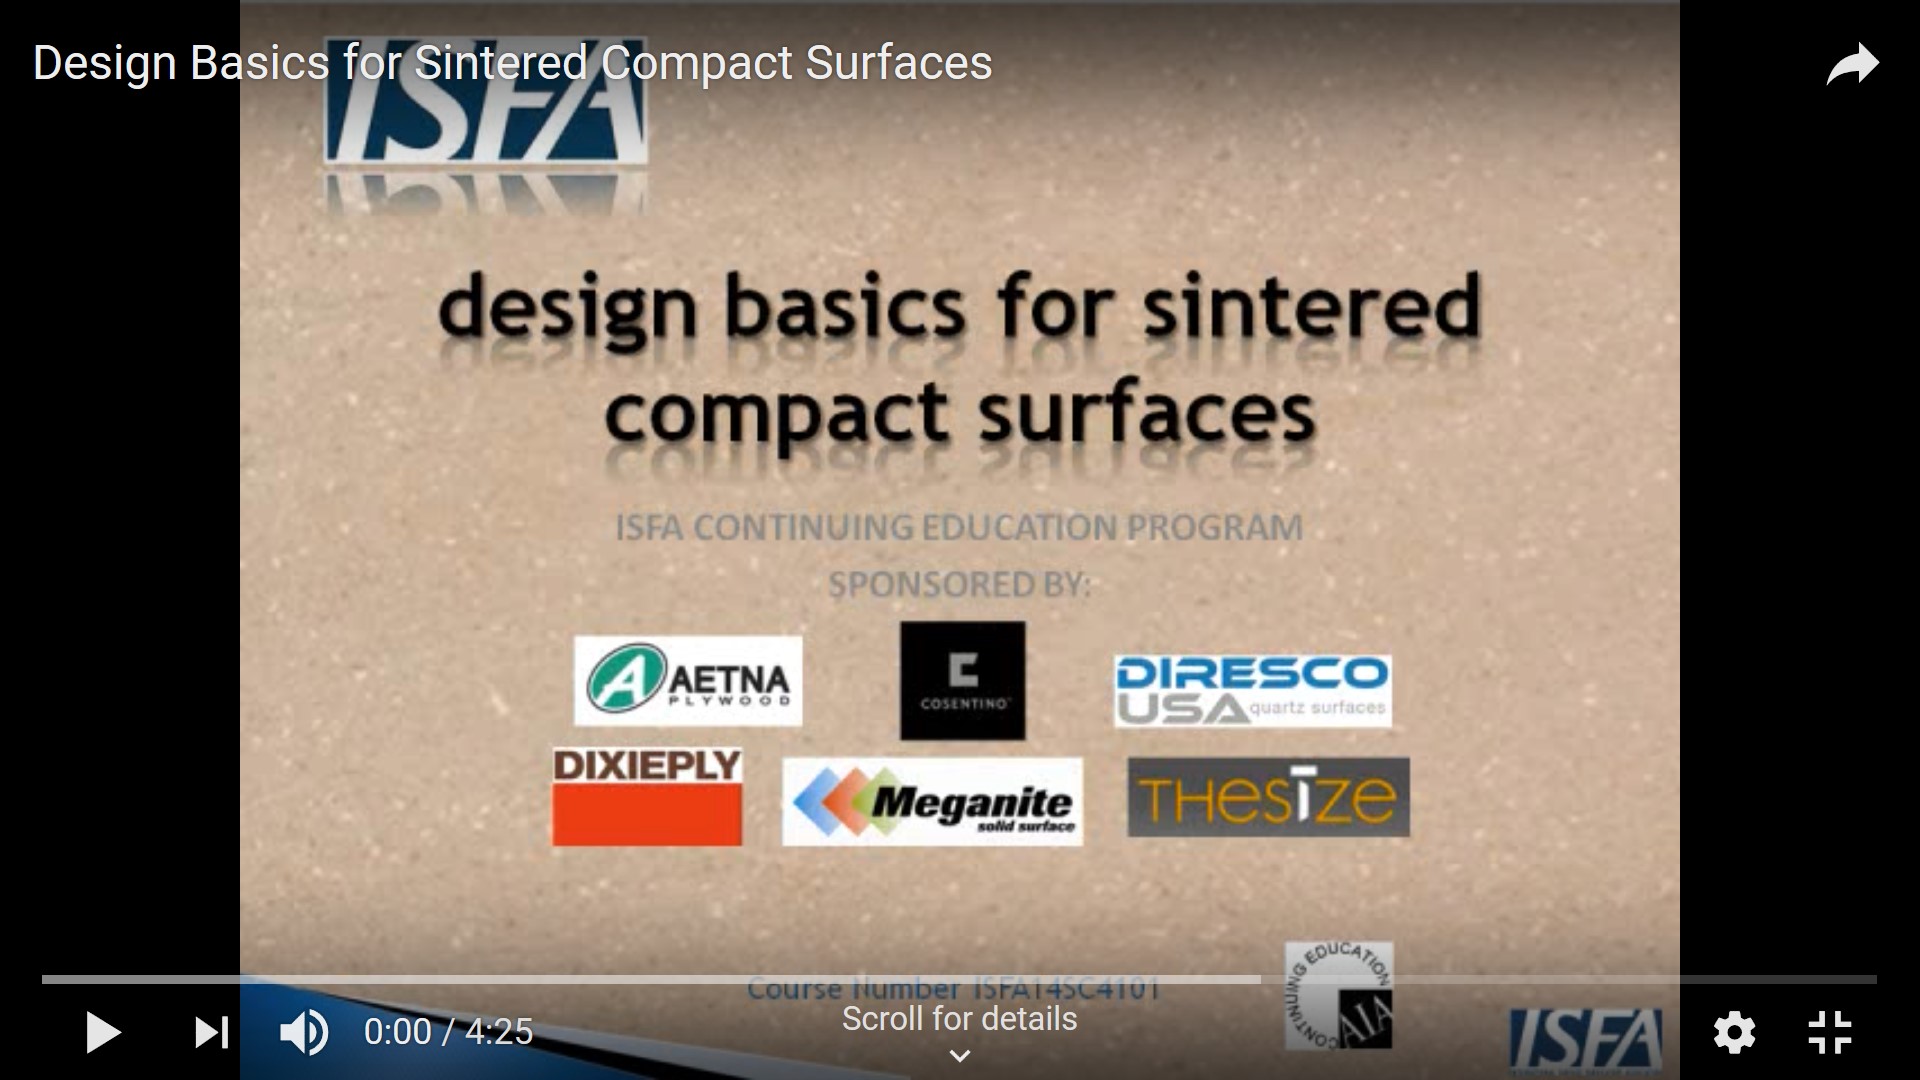 Video: Design Basics of Compact Sintered Surface